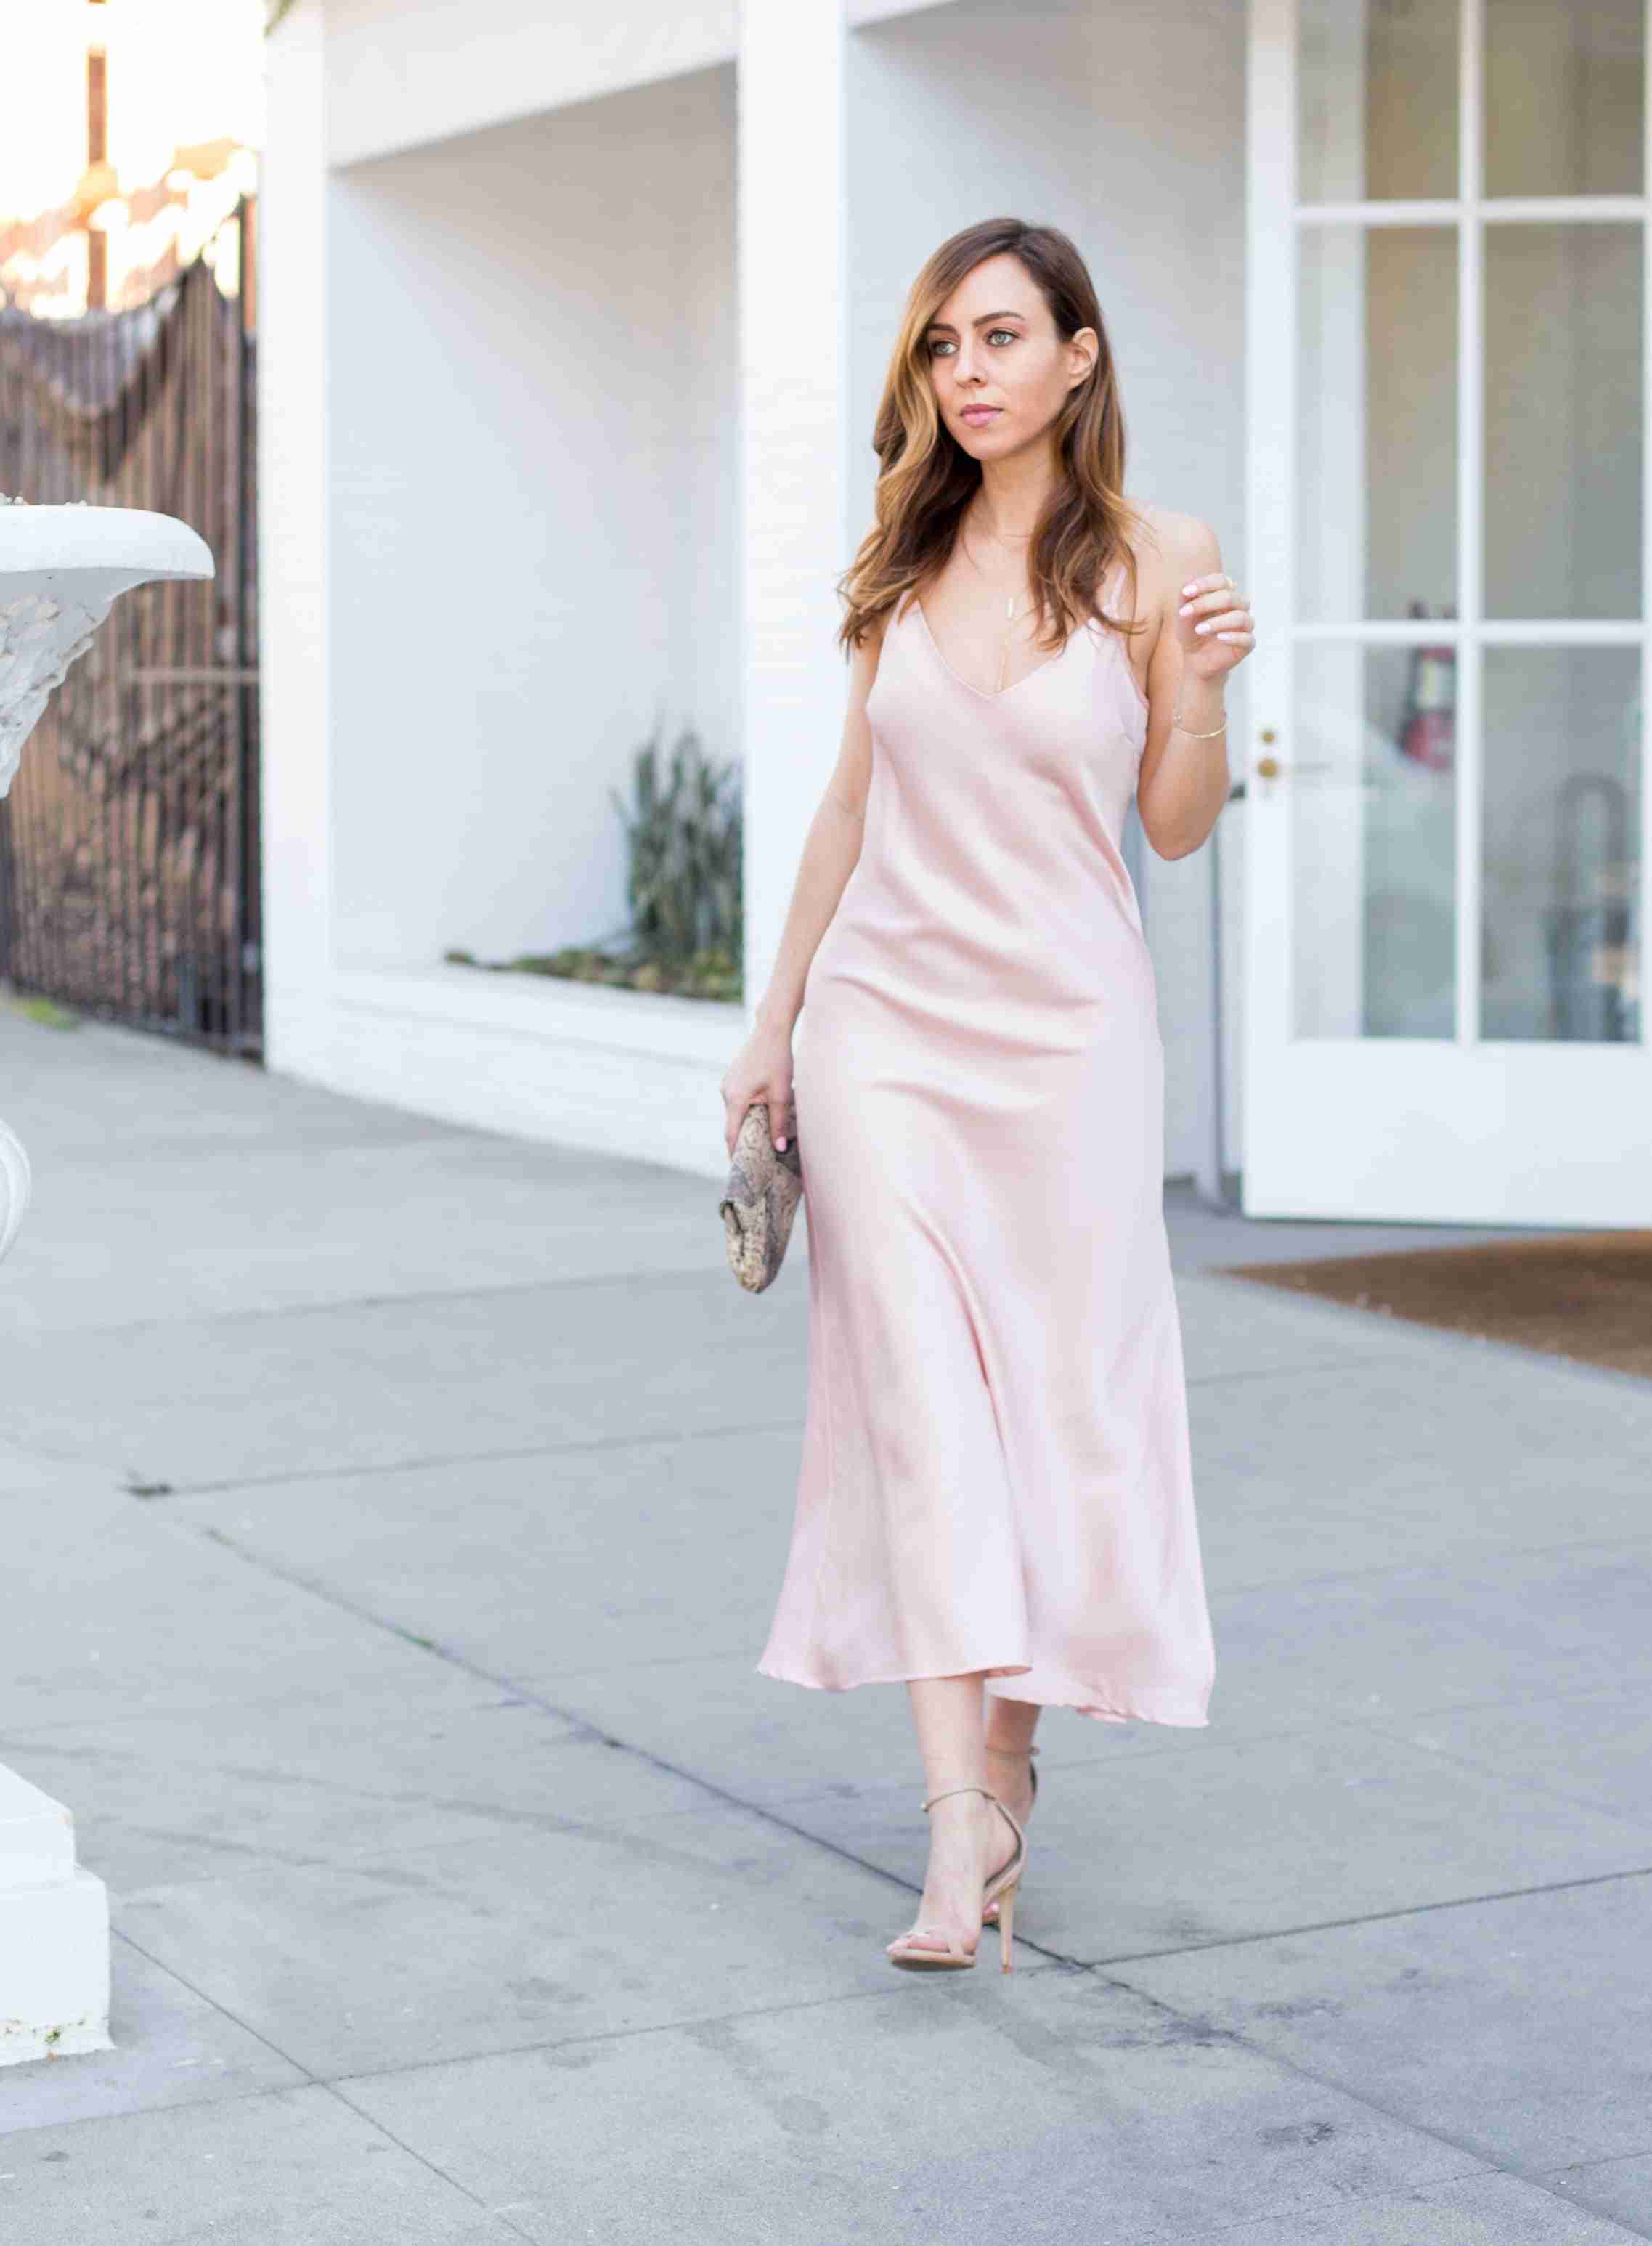 Slip Dress Outfit - How to Wear a Slip Dress Outfit